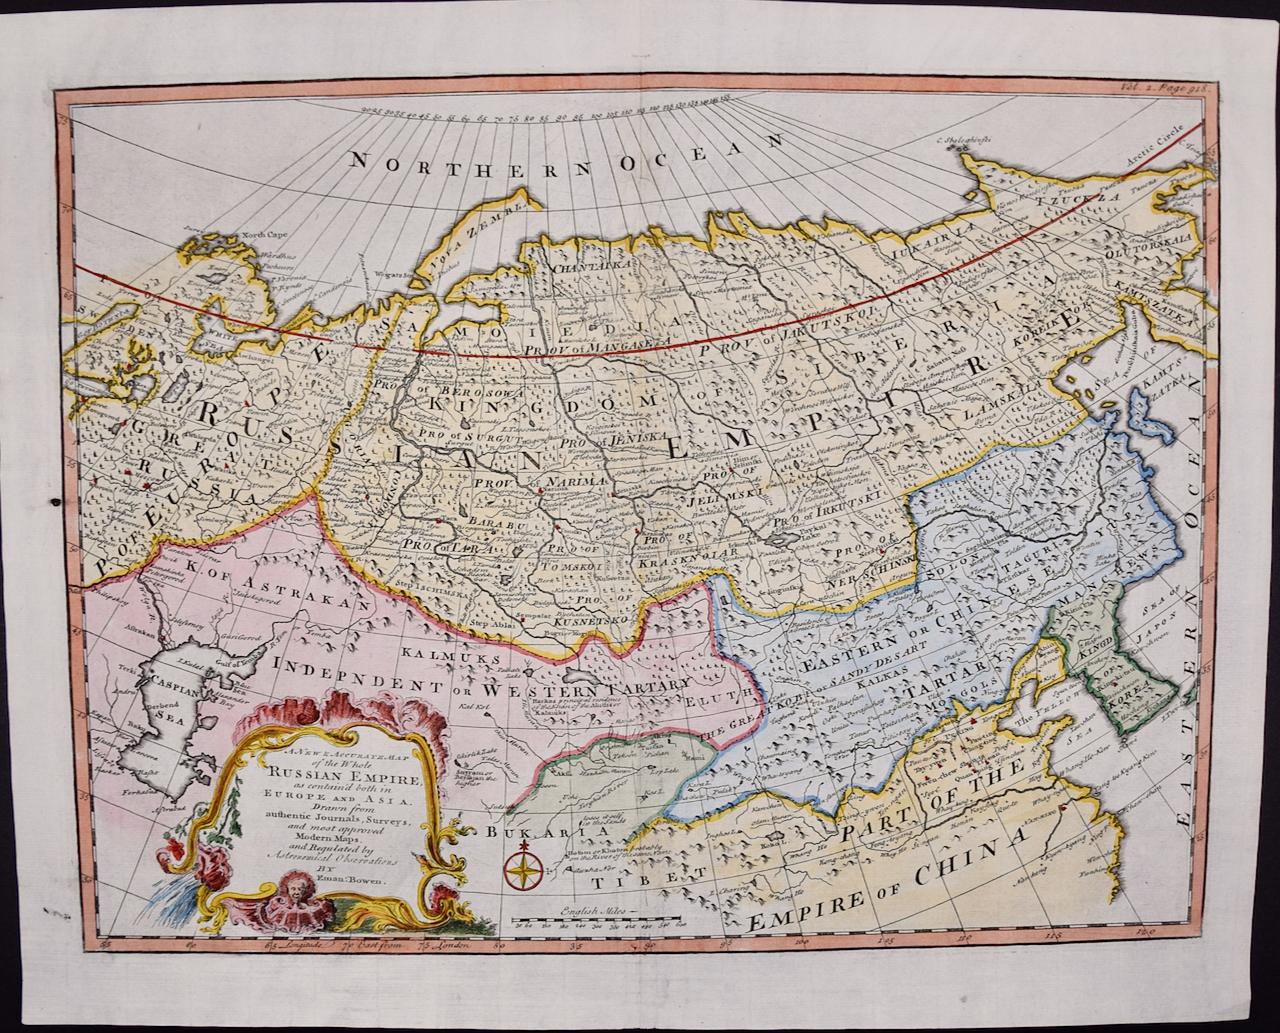 Map of the Russian Empire: An Original 18th Century Hand-colored Map by E. Bowen